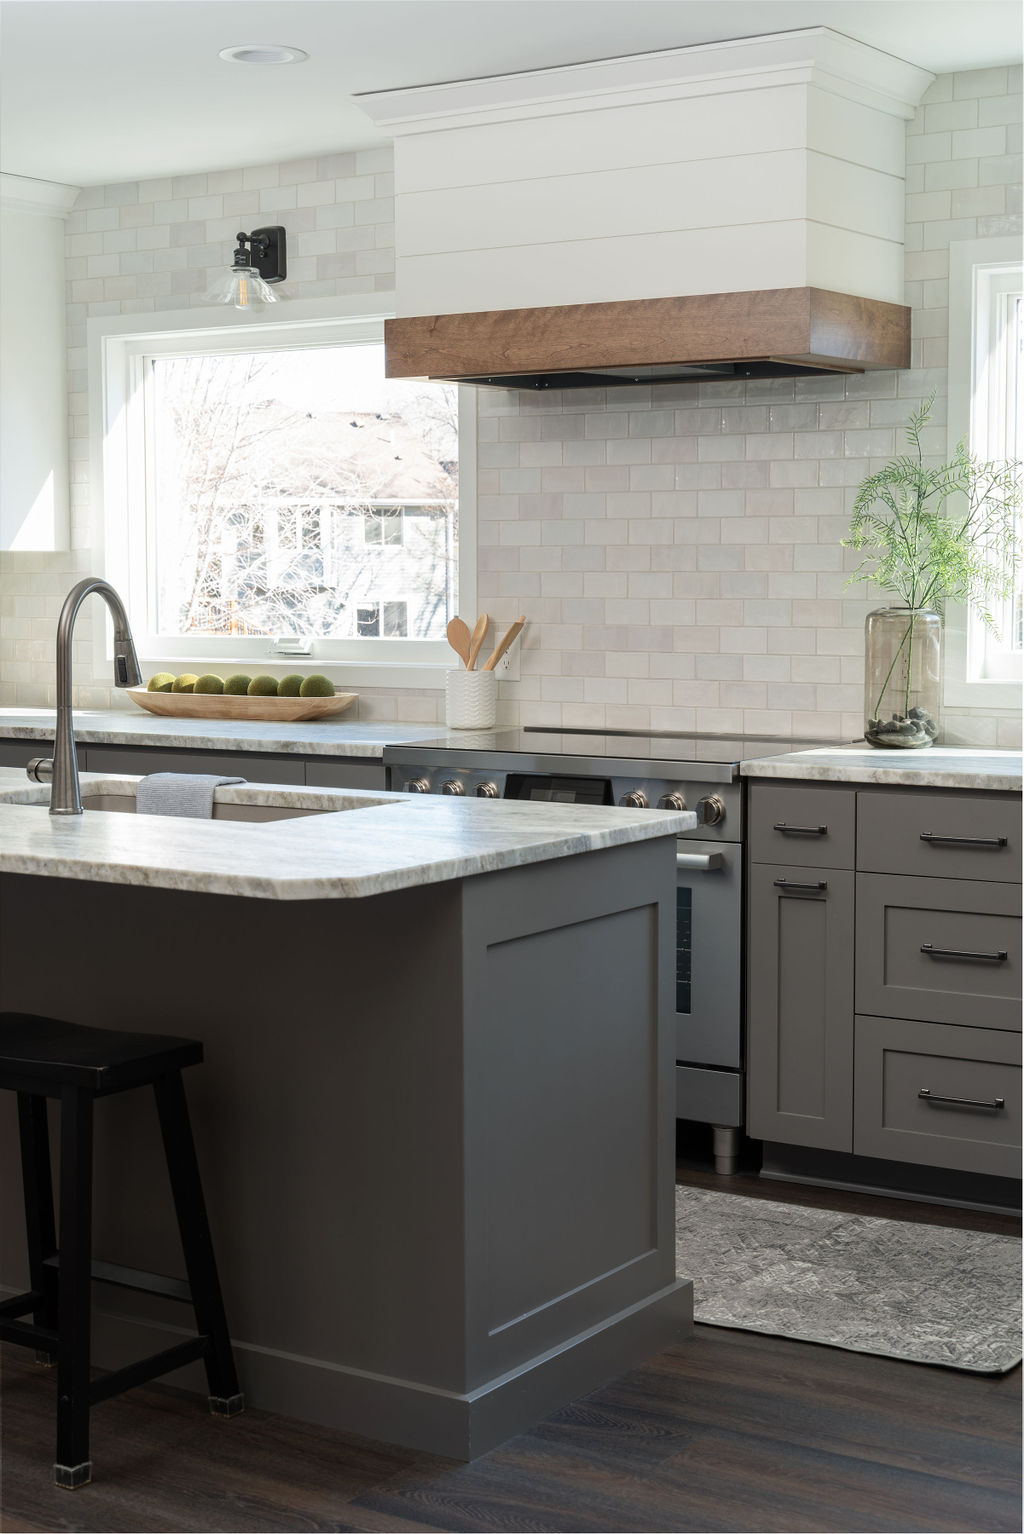 A modern gray kitchen with a white island and stools.